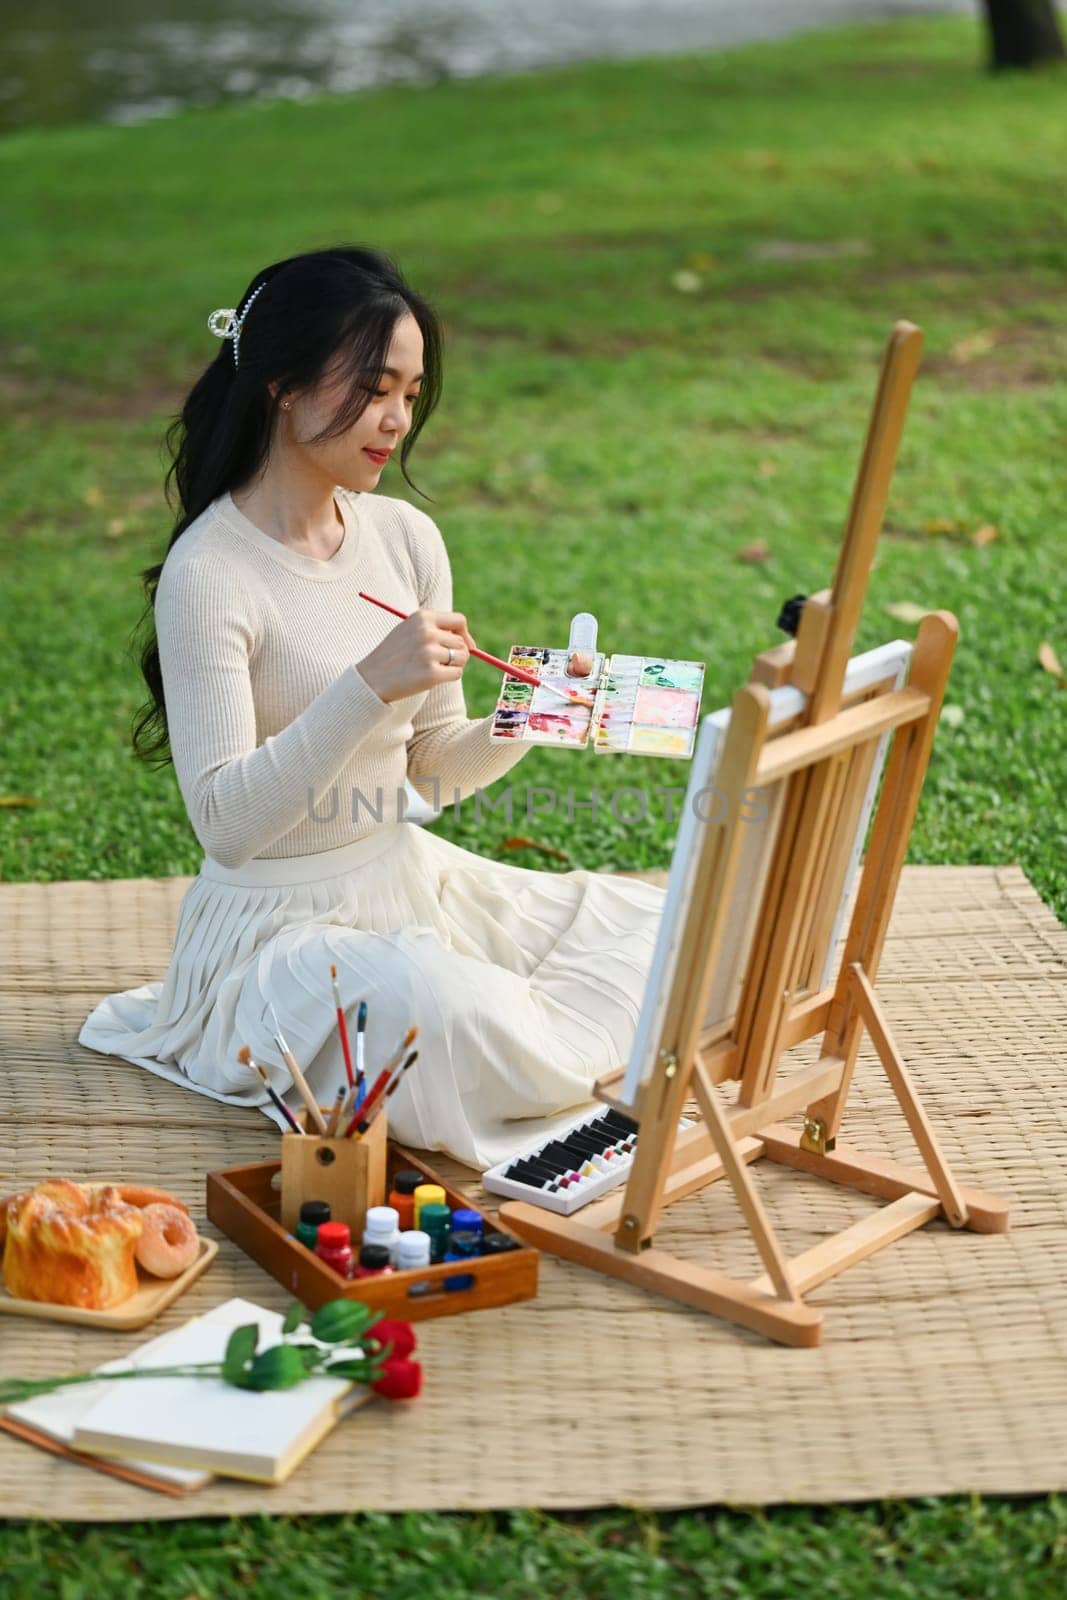 Talented young woman painting on canvas in the park. Art and leisure activity concept.